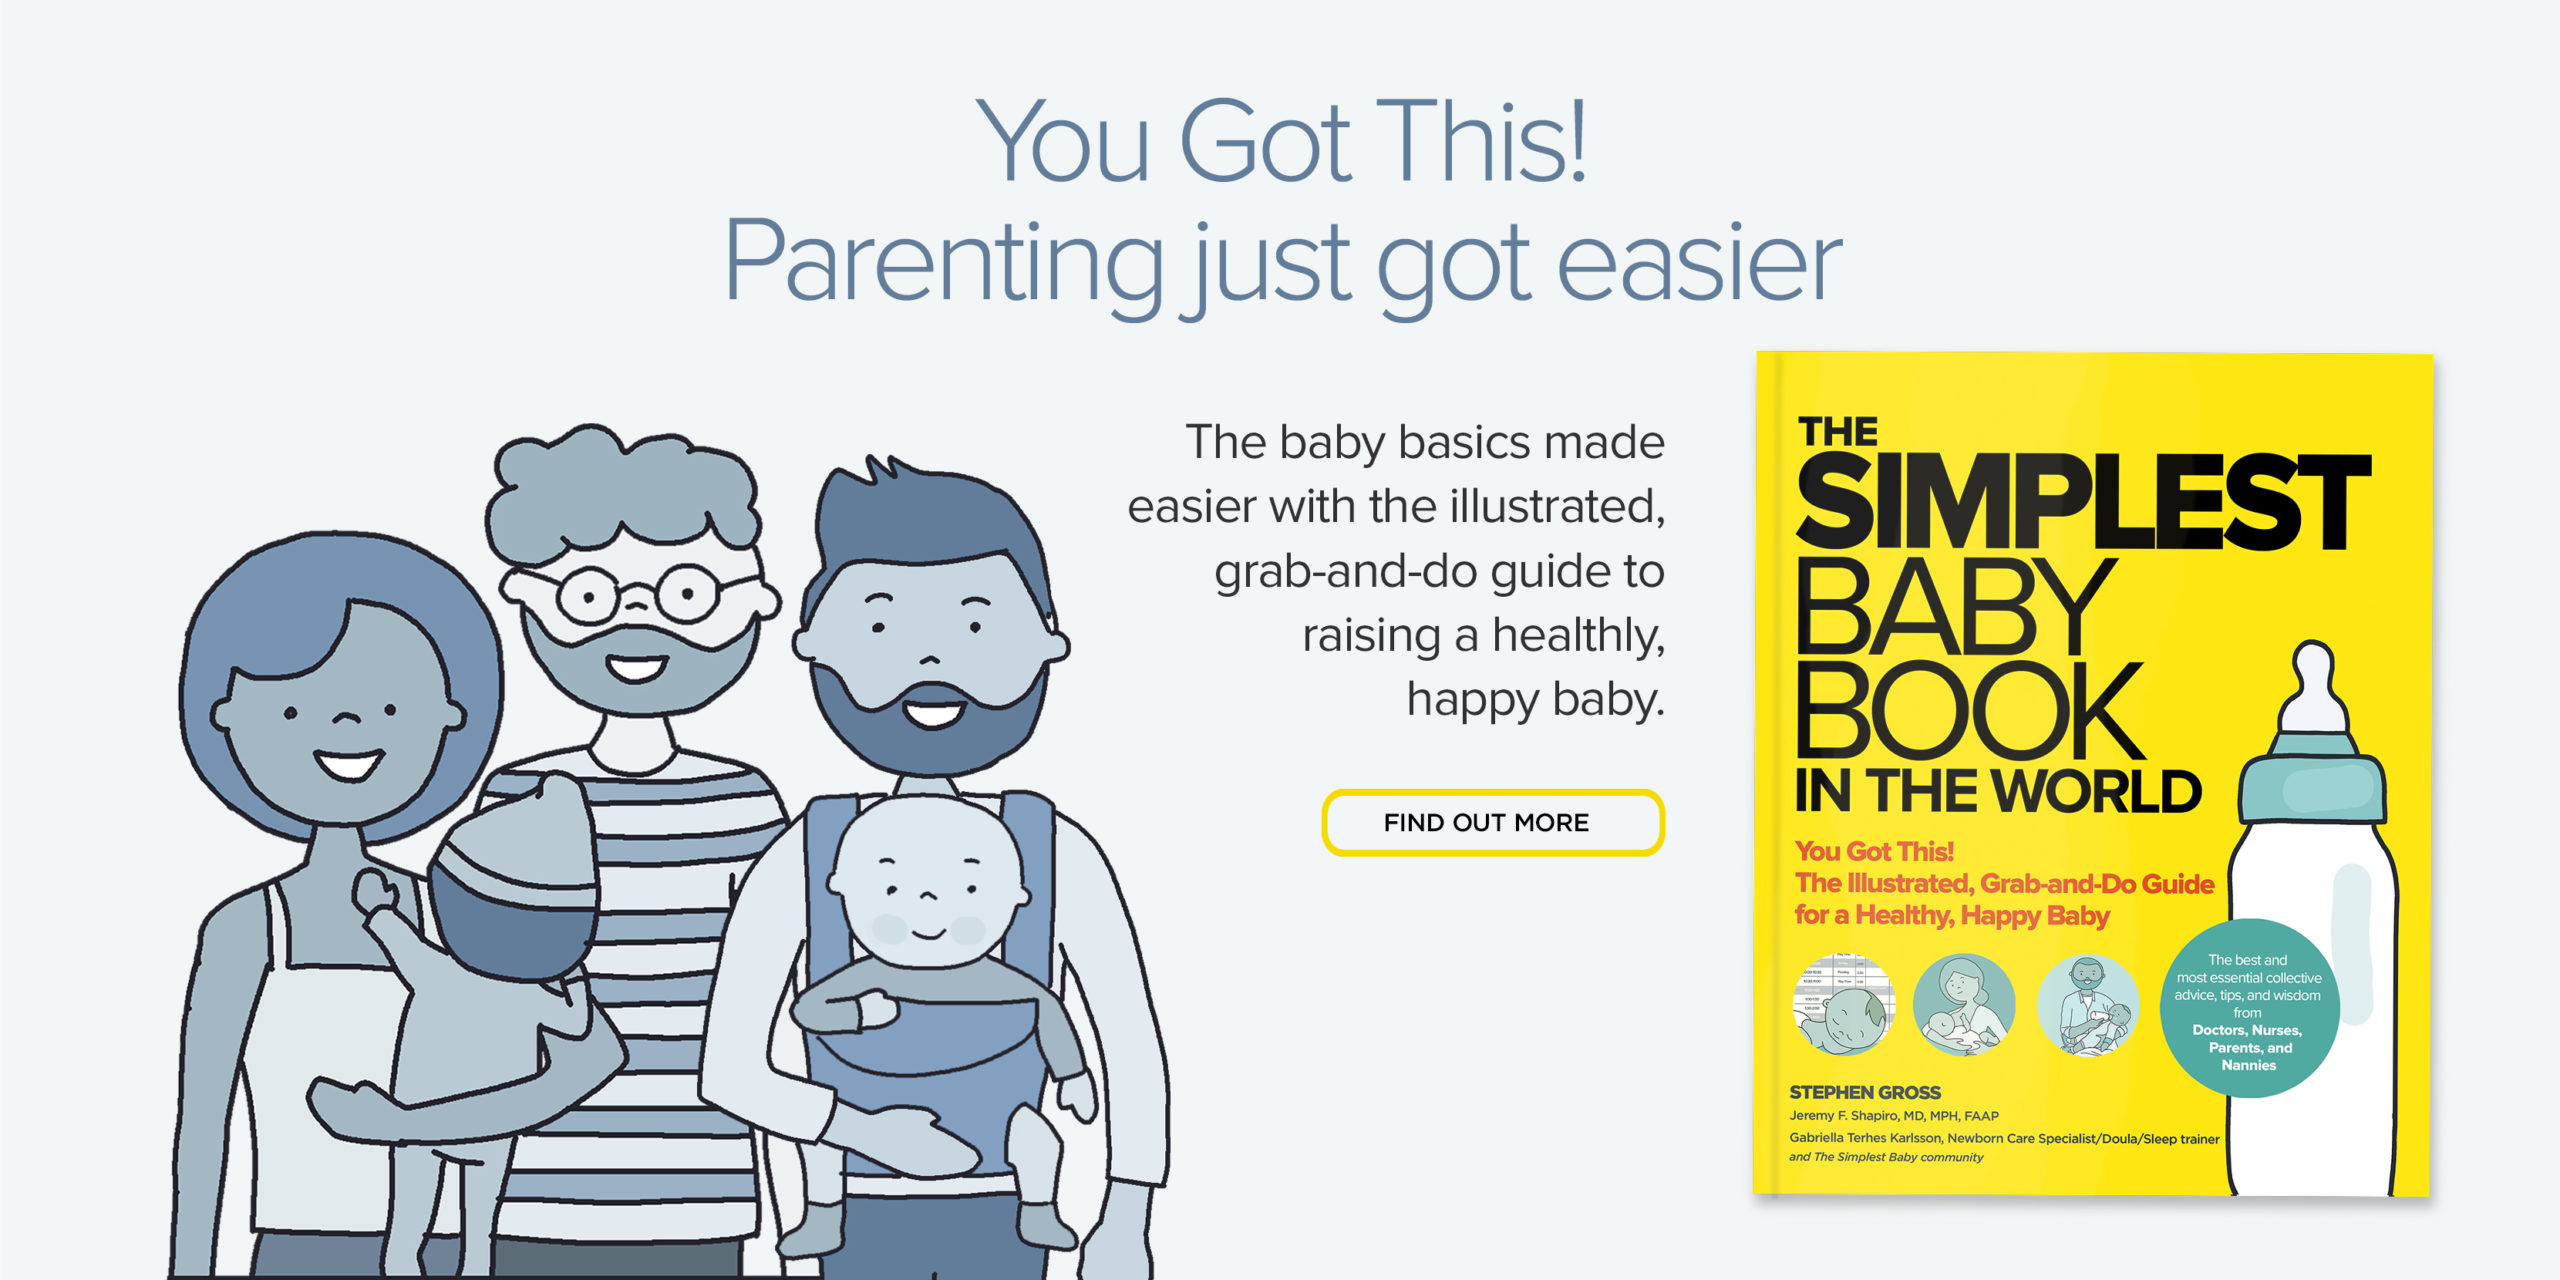 You Got This! Parenting just got easier: The baby basics made easier with the illustrated, grab-and-do guide to raising a healthy, happy baby